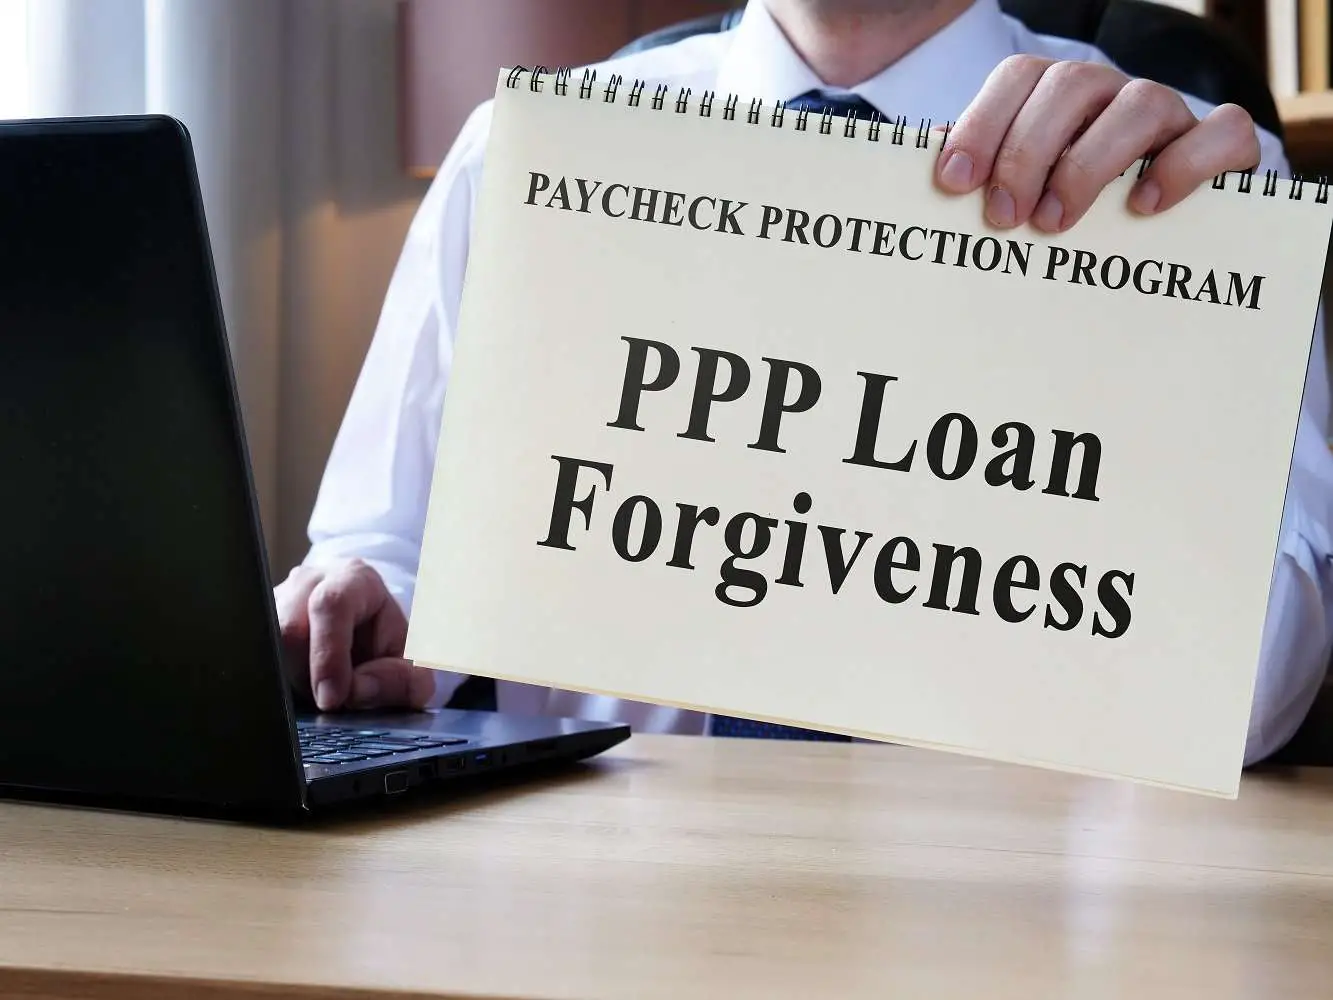 When to Apply for PPP Loan Forgiveness